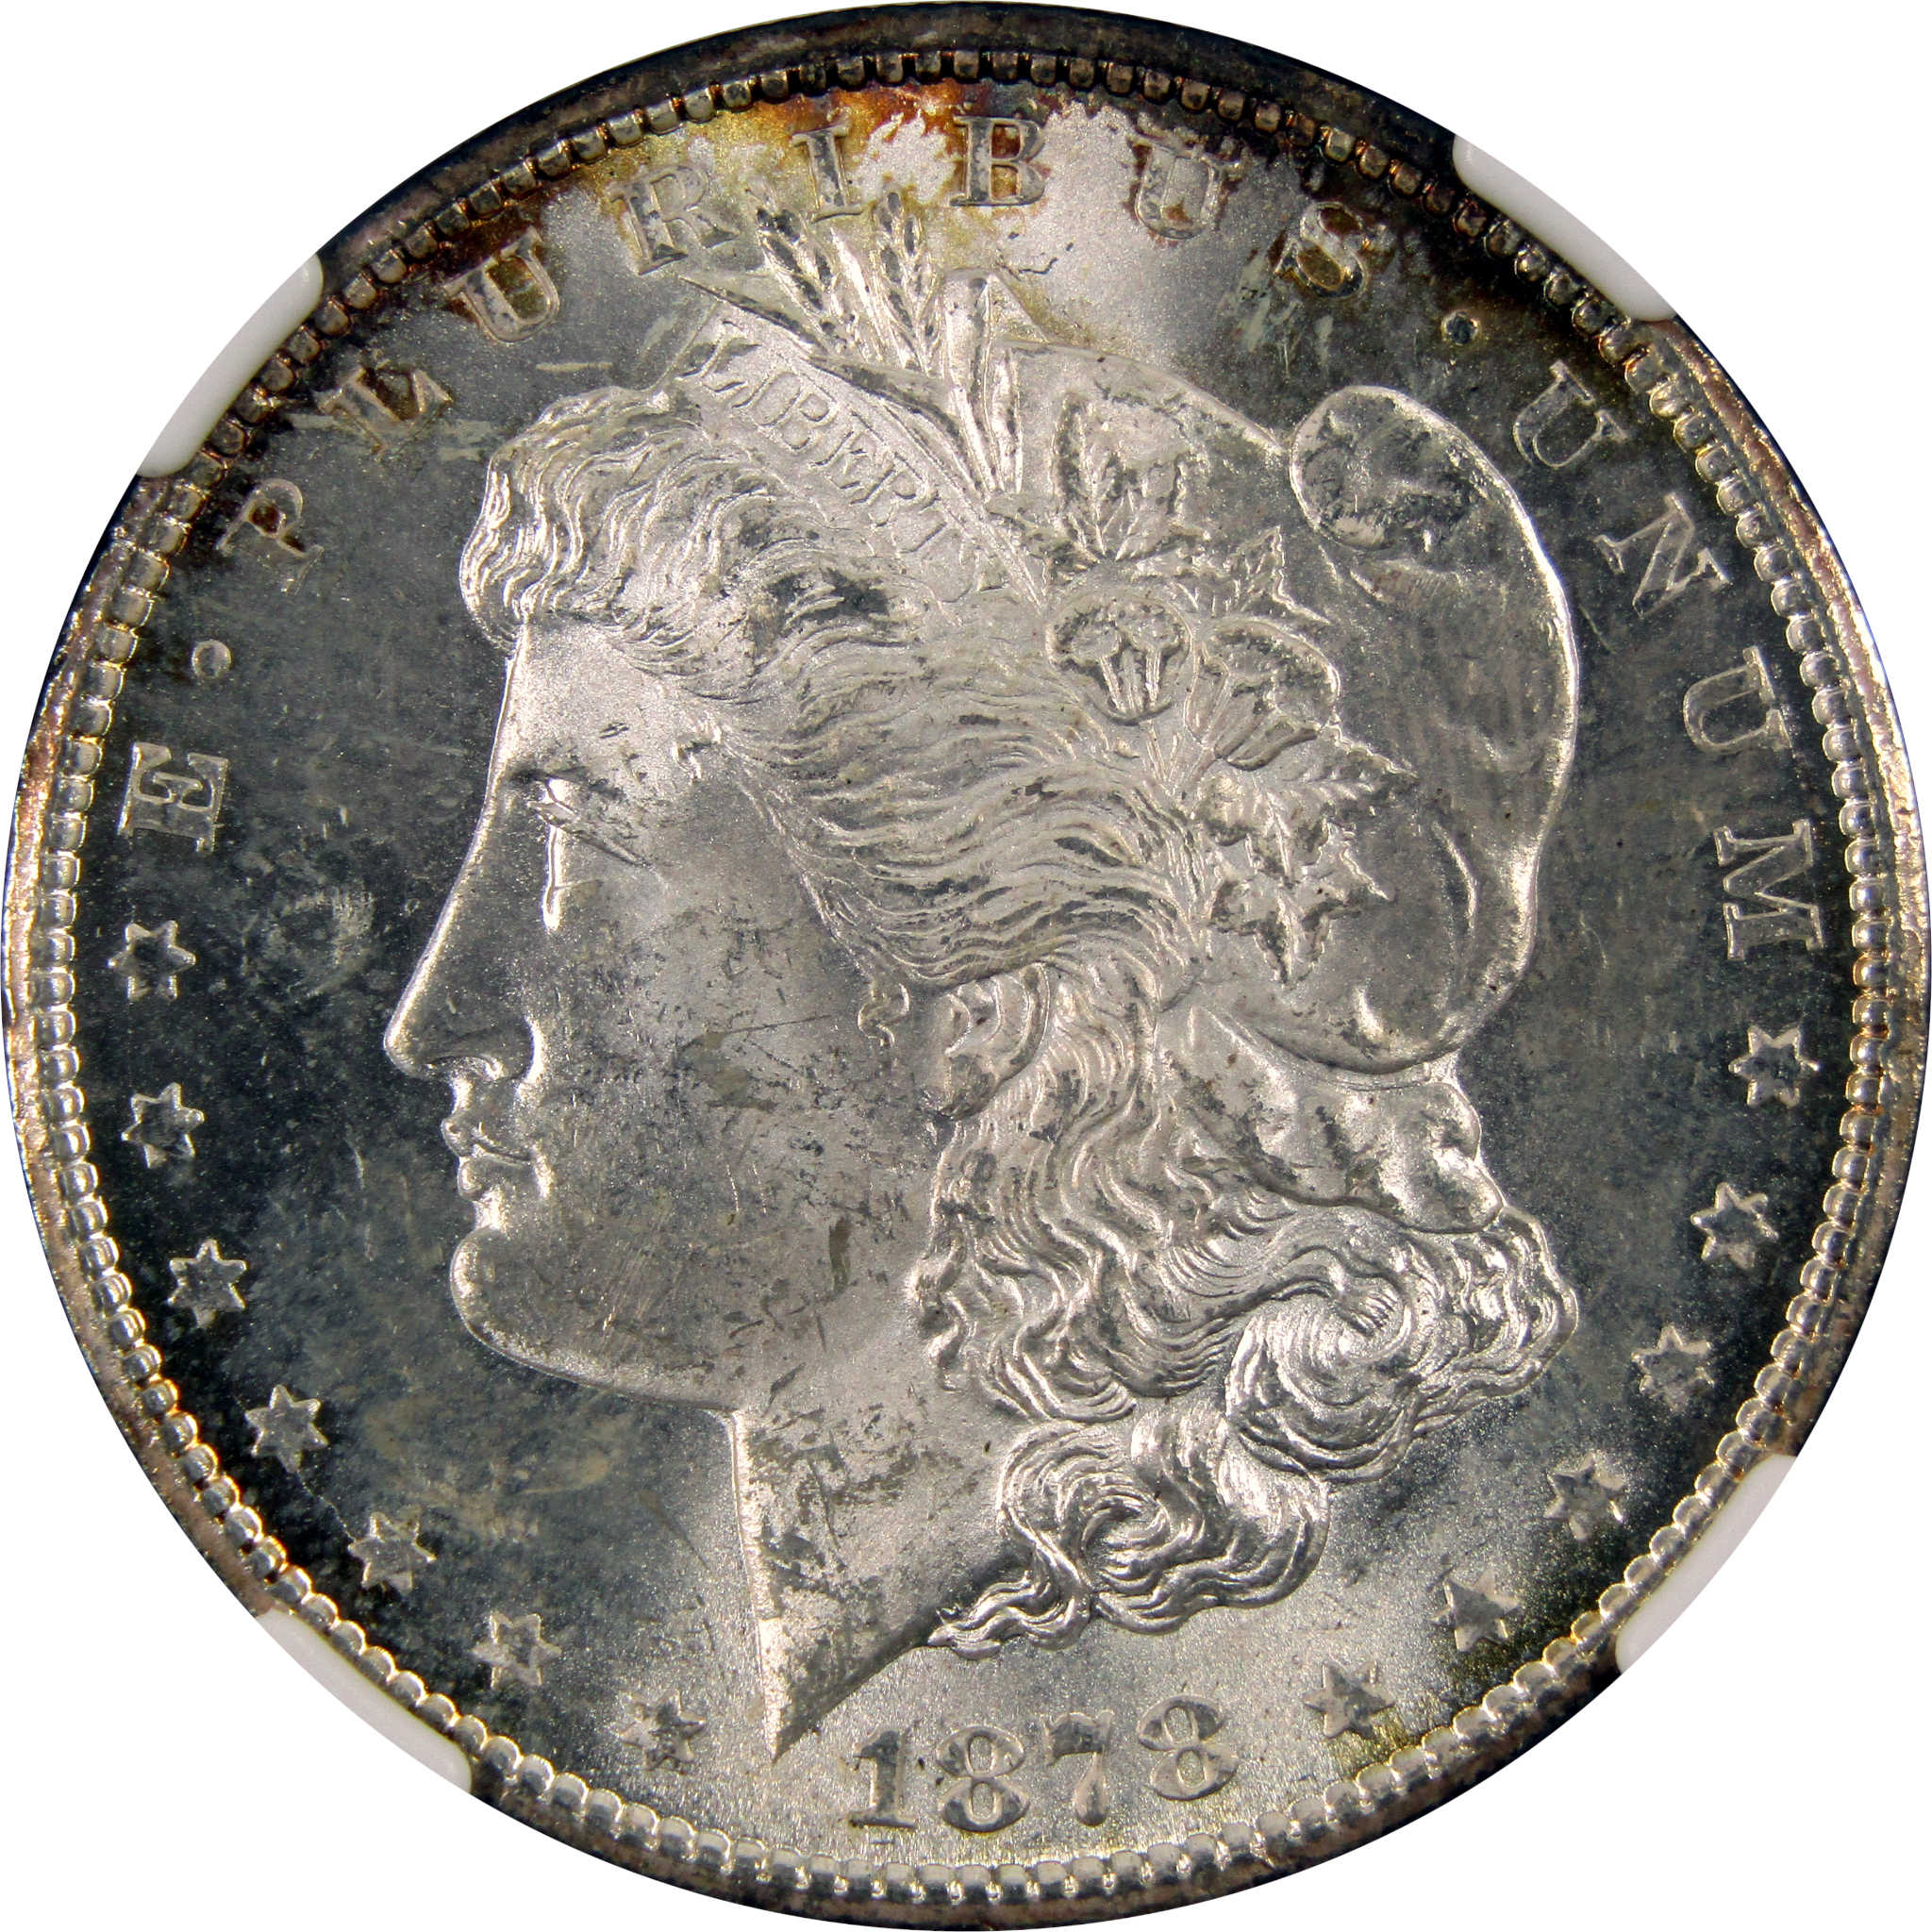 1878 CC Morgan Dollar MS 62 NGC 90% Silver $1 Uncirculated SKU:I9139 - Morgan coin - Morgan silver dollar - Morgan silver dollar for sale - Profile Coins &amp; Collectibles